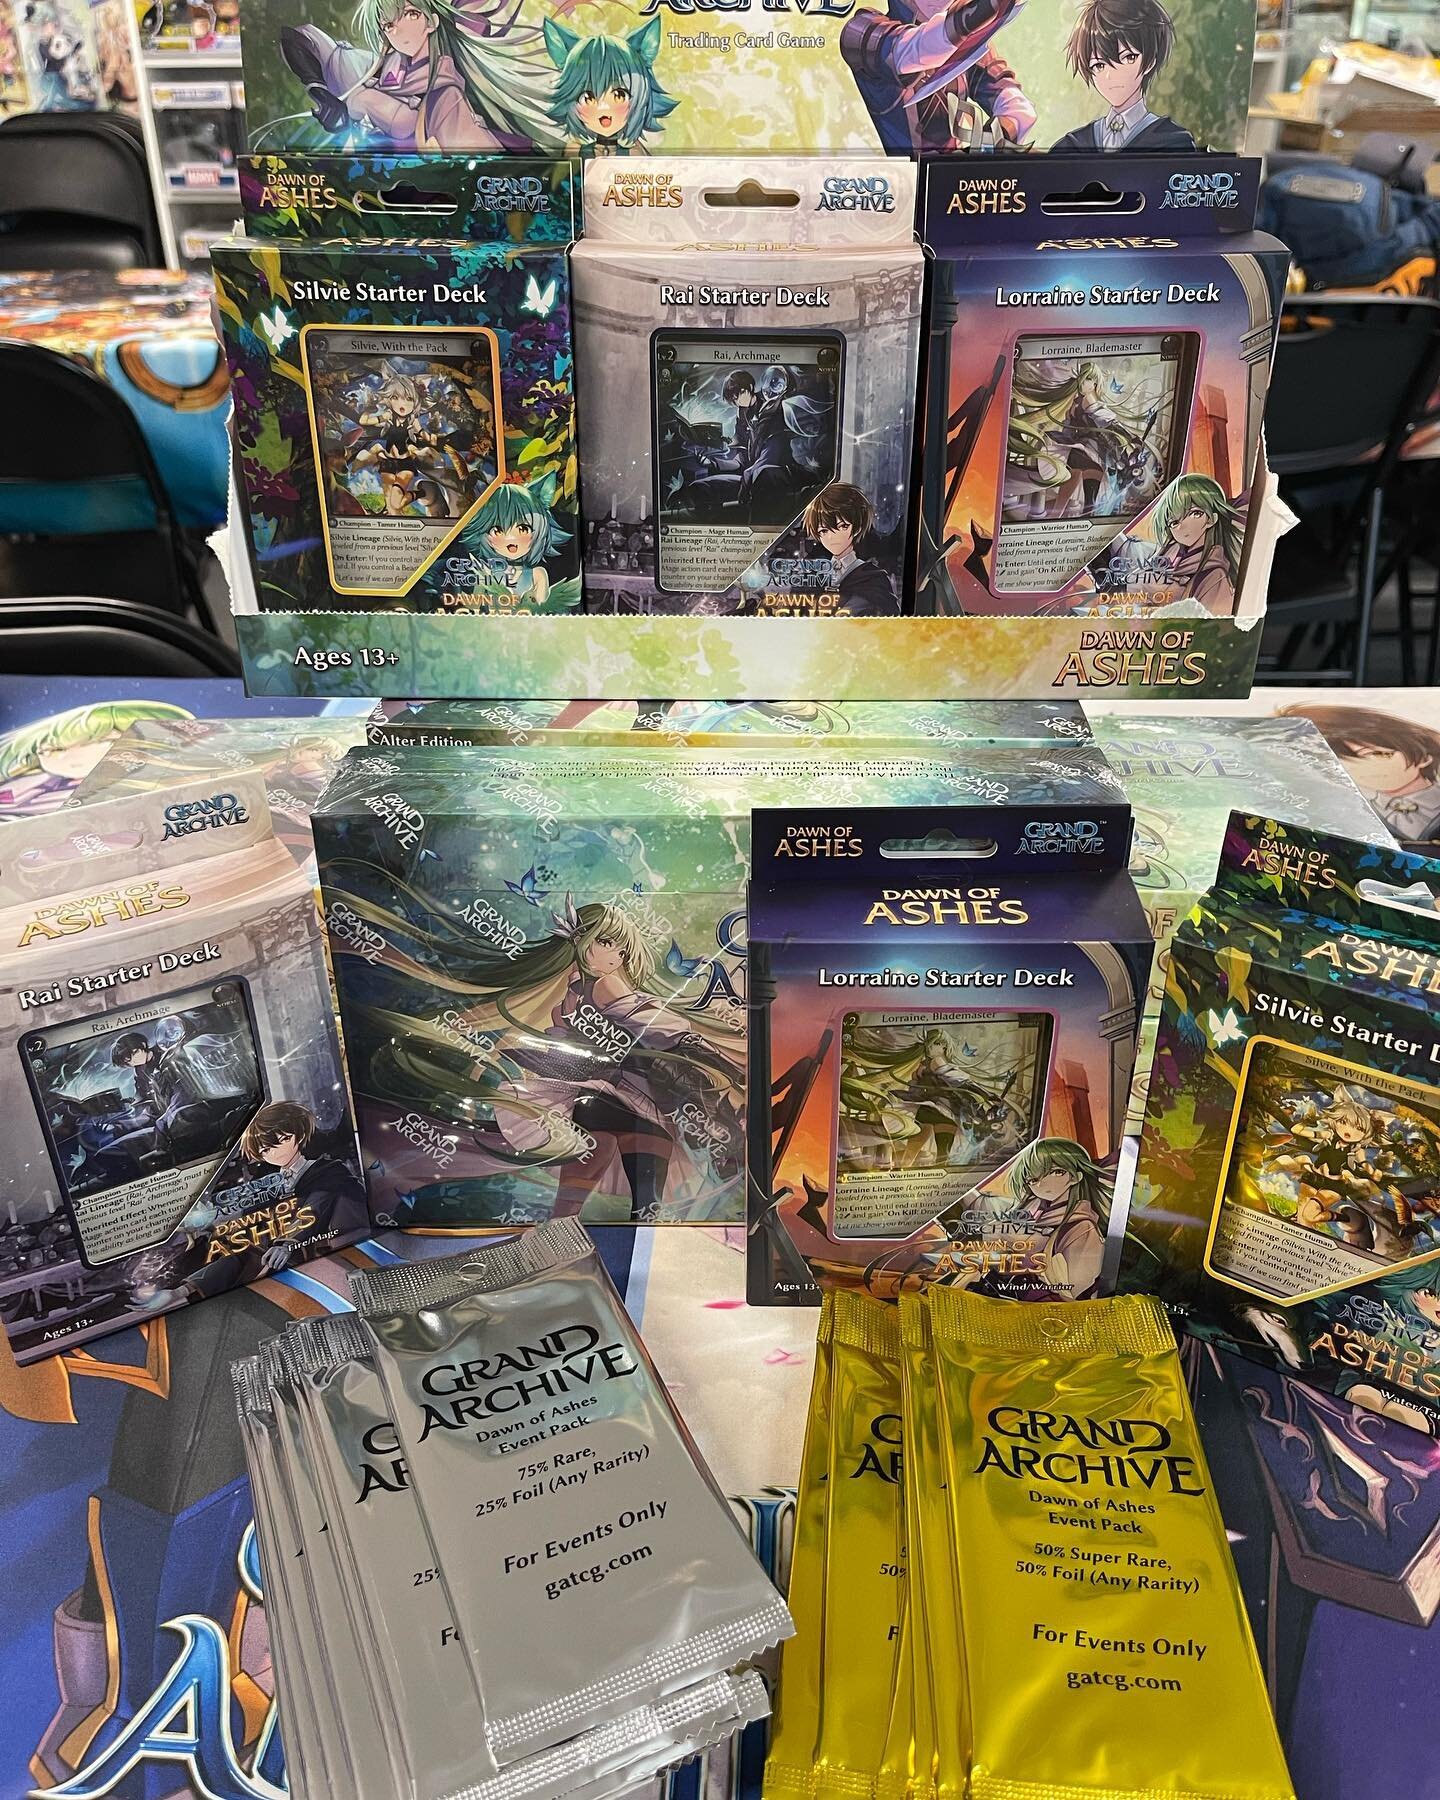 #grandarchive and #battlespiritsaga tournament tonight at 7pm. Get the new tournament packs and events packs with great exclusive cards inside! Let&rsquo;s get a good crowd for these box tournaments. 
Extra tps for top ranks double winners packs . If